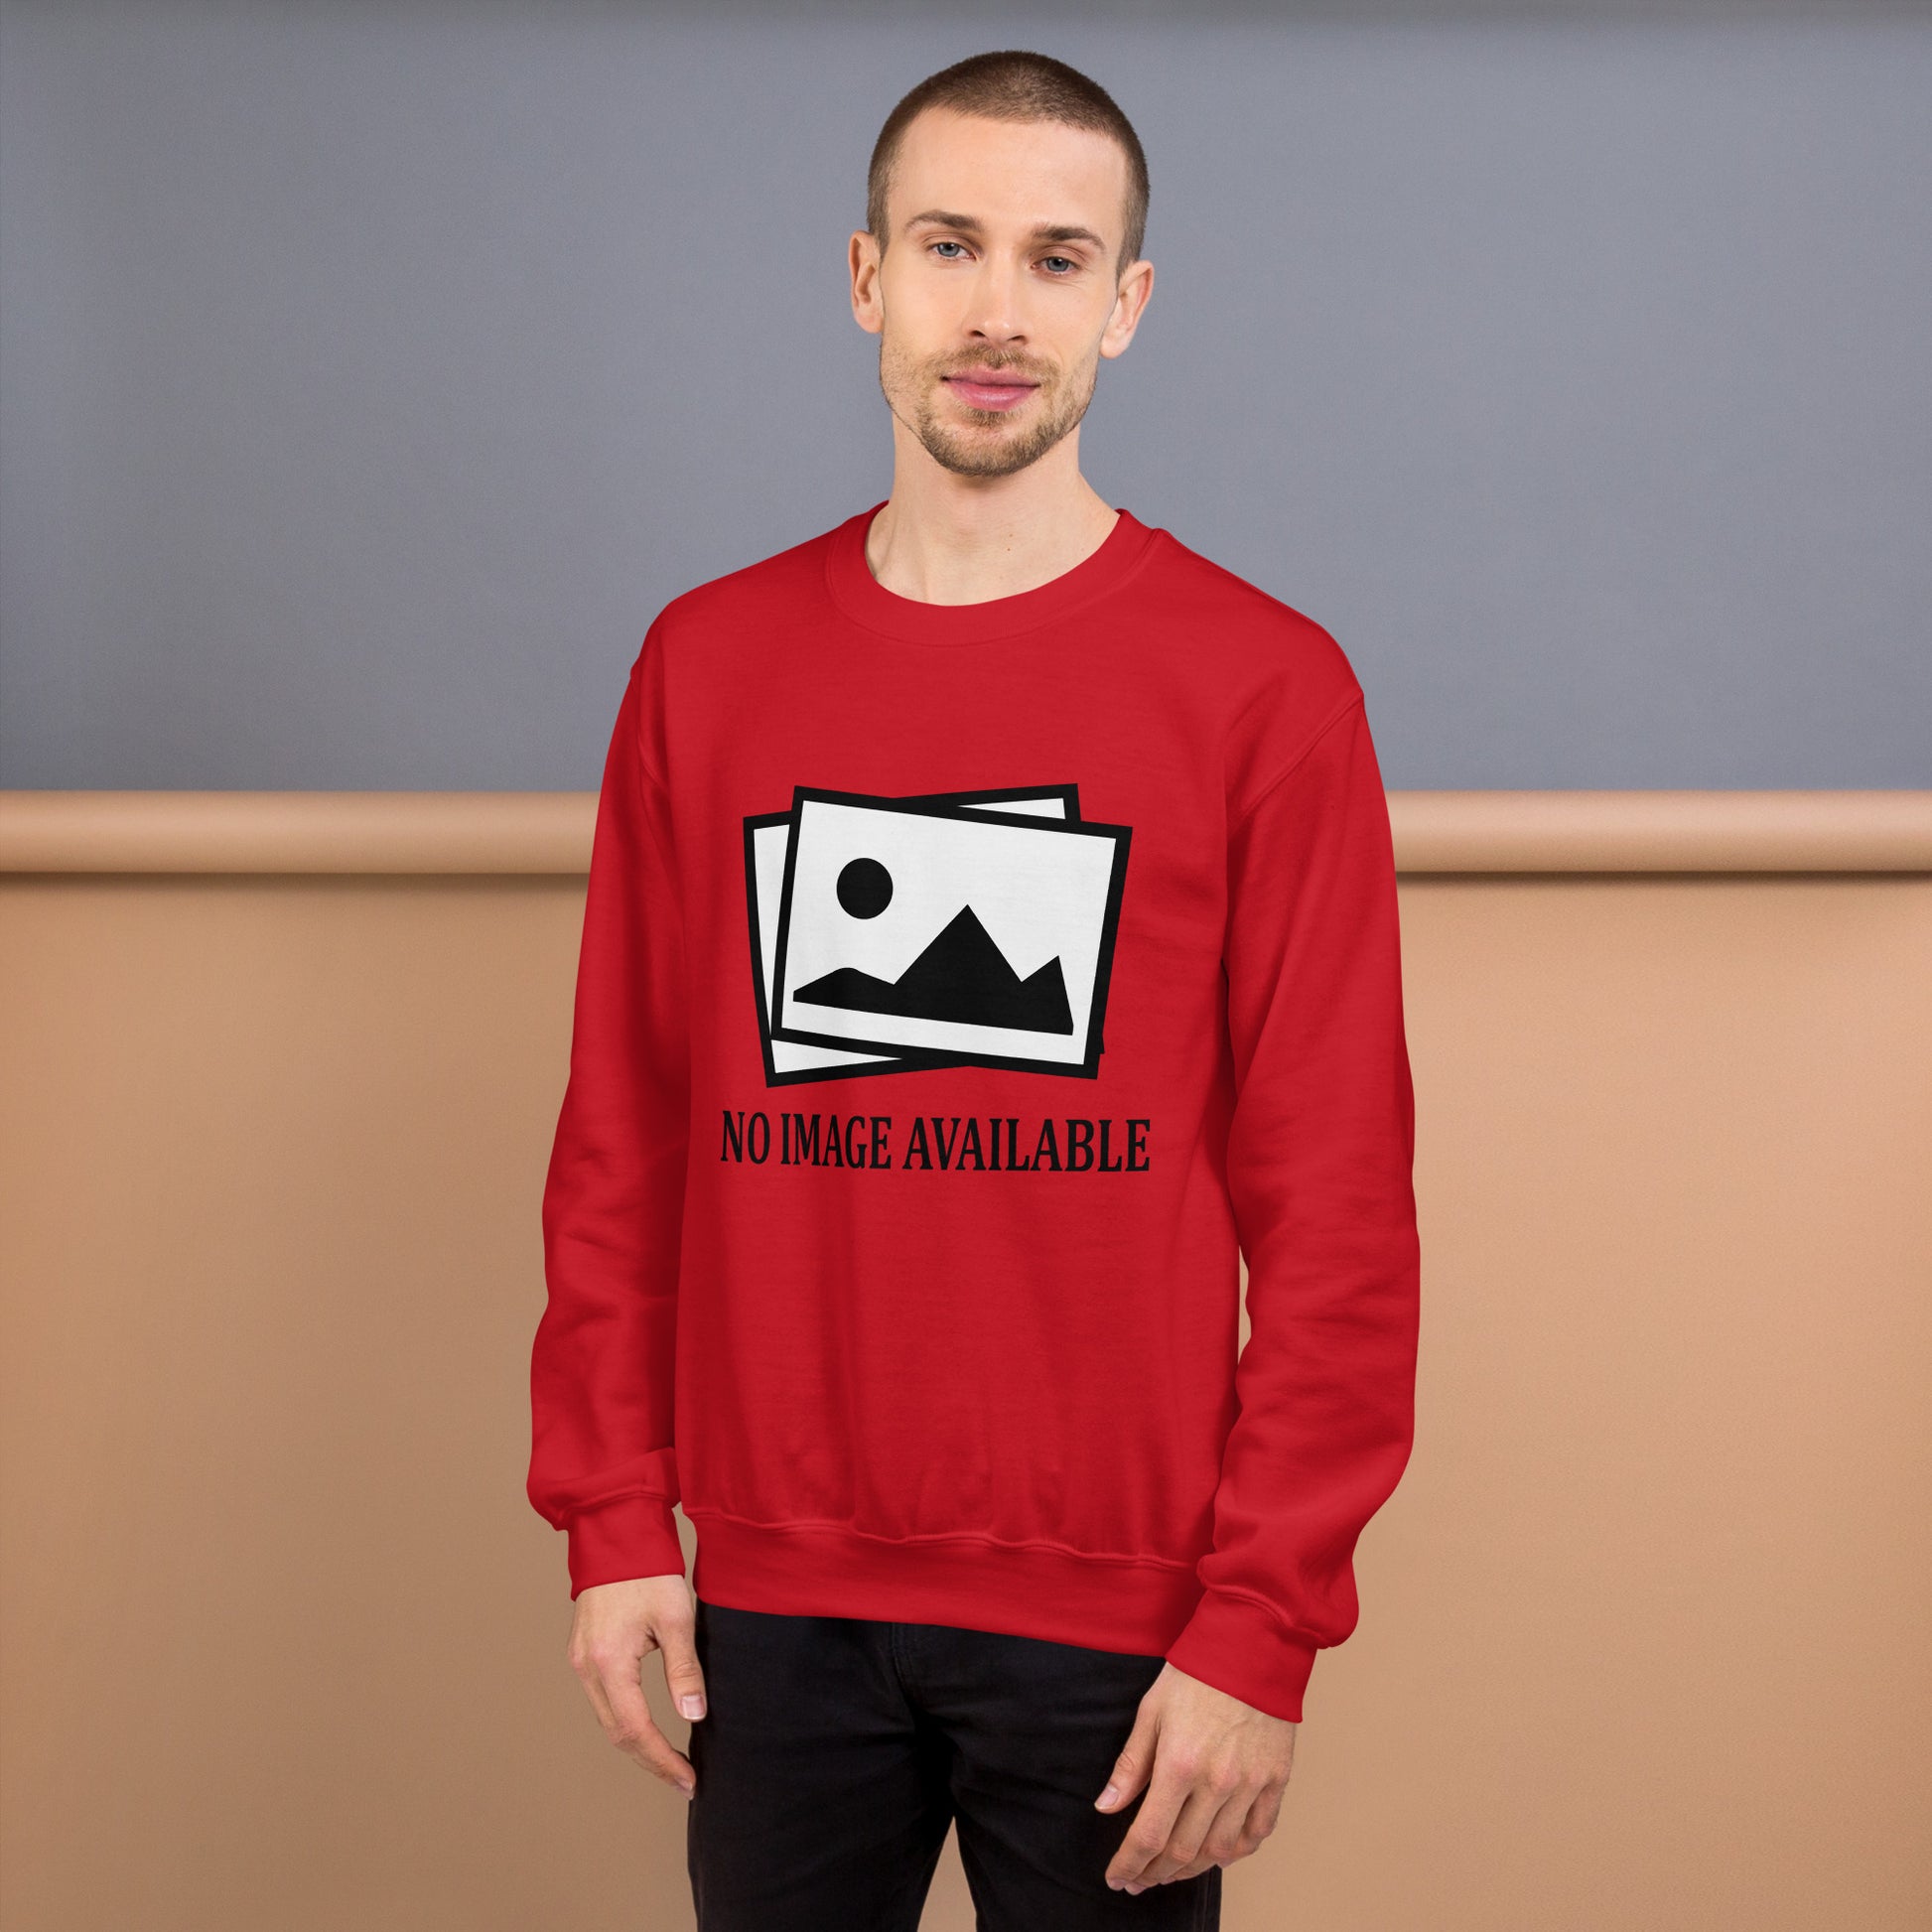 Men with red sweatshirt with image and text "no image available"